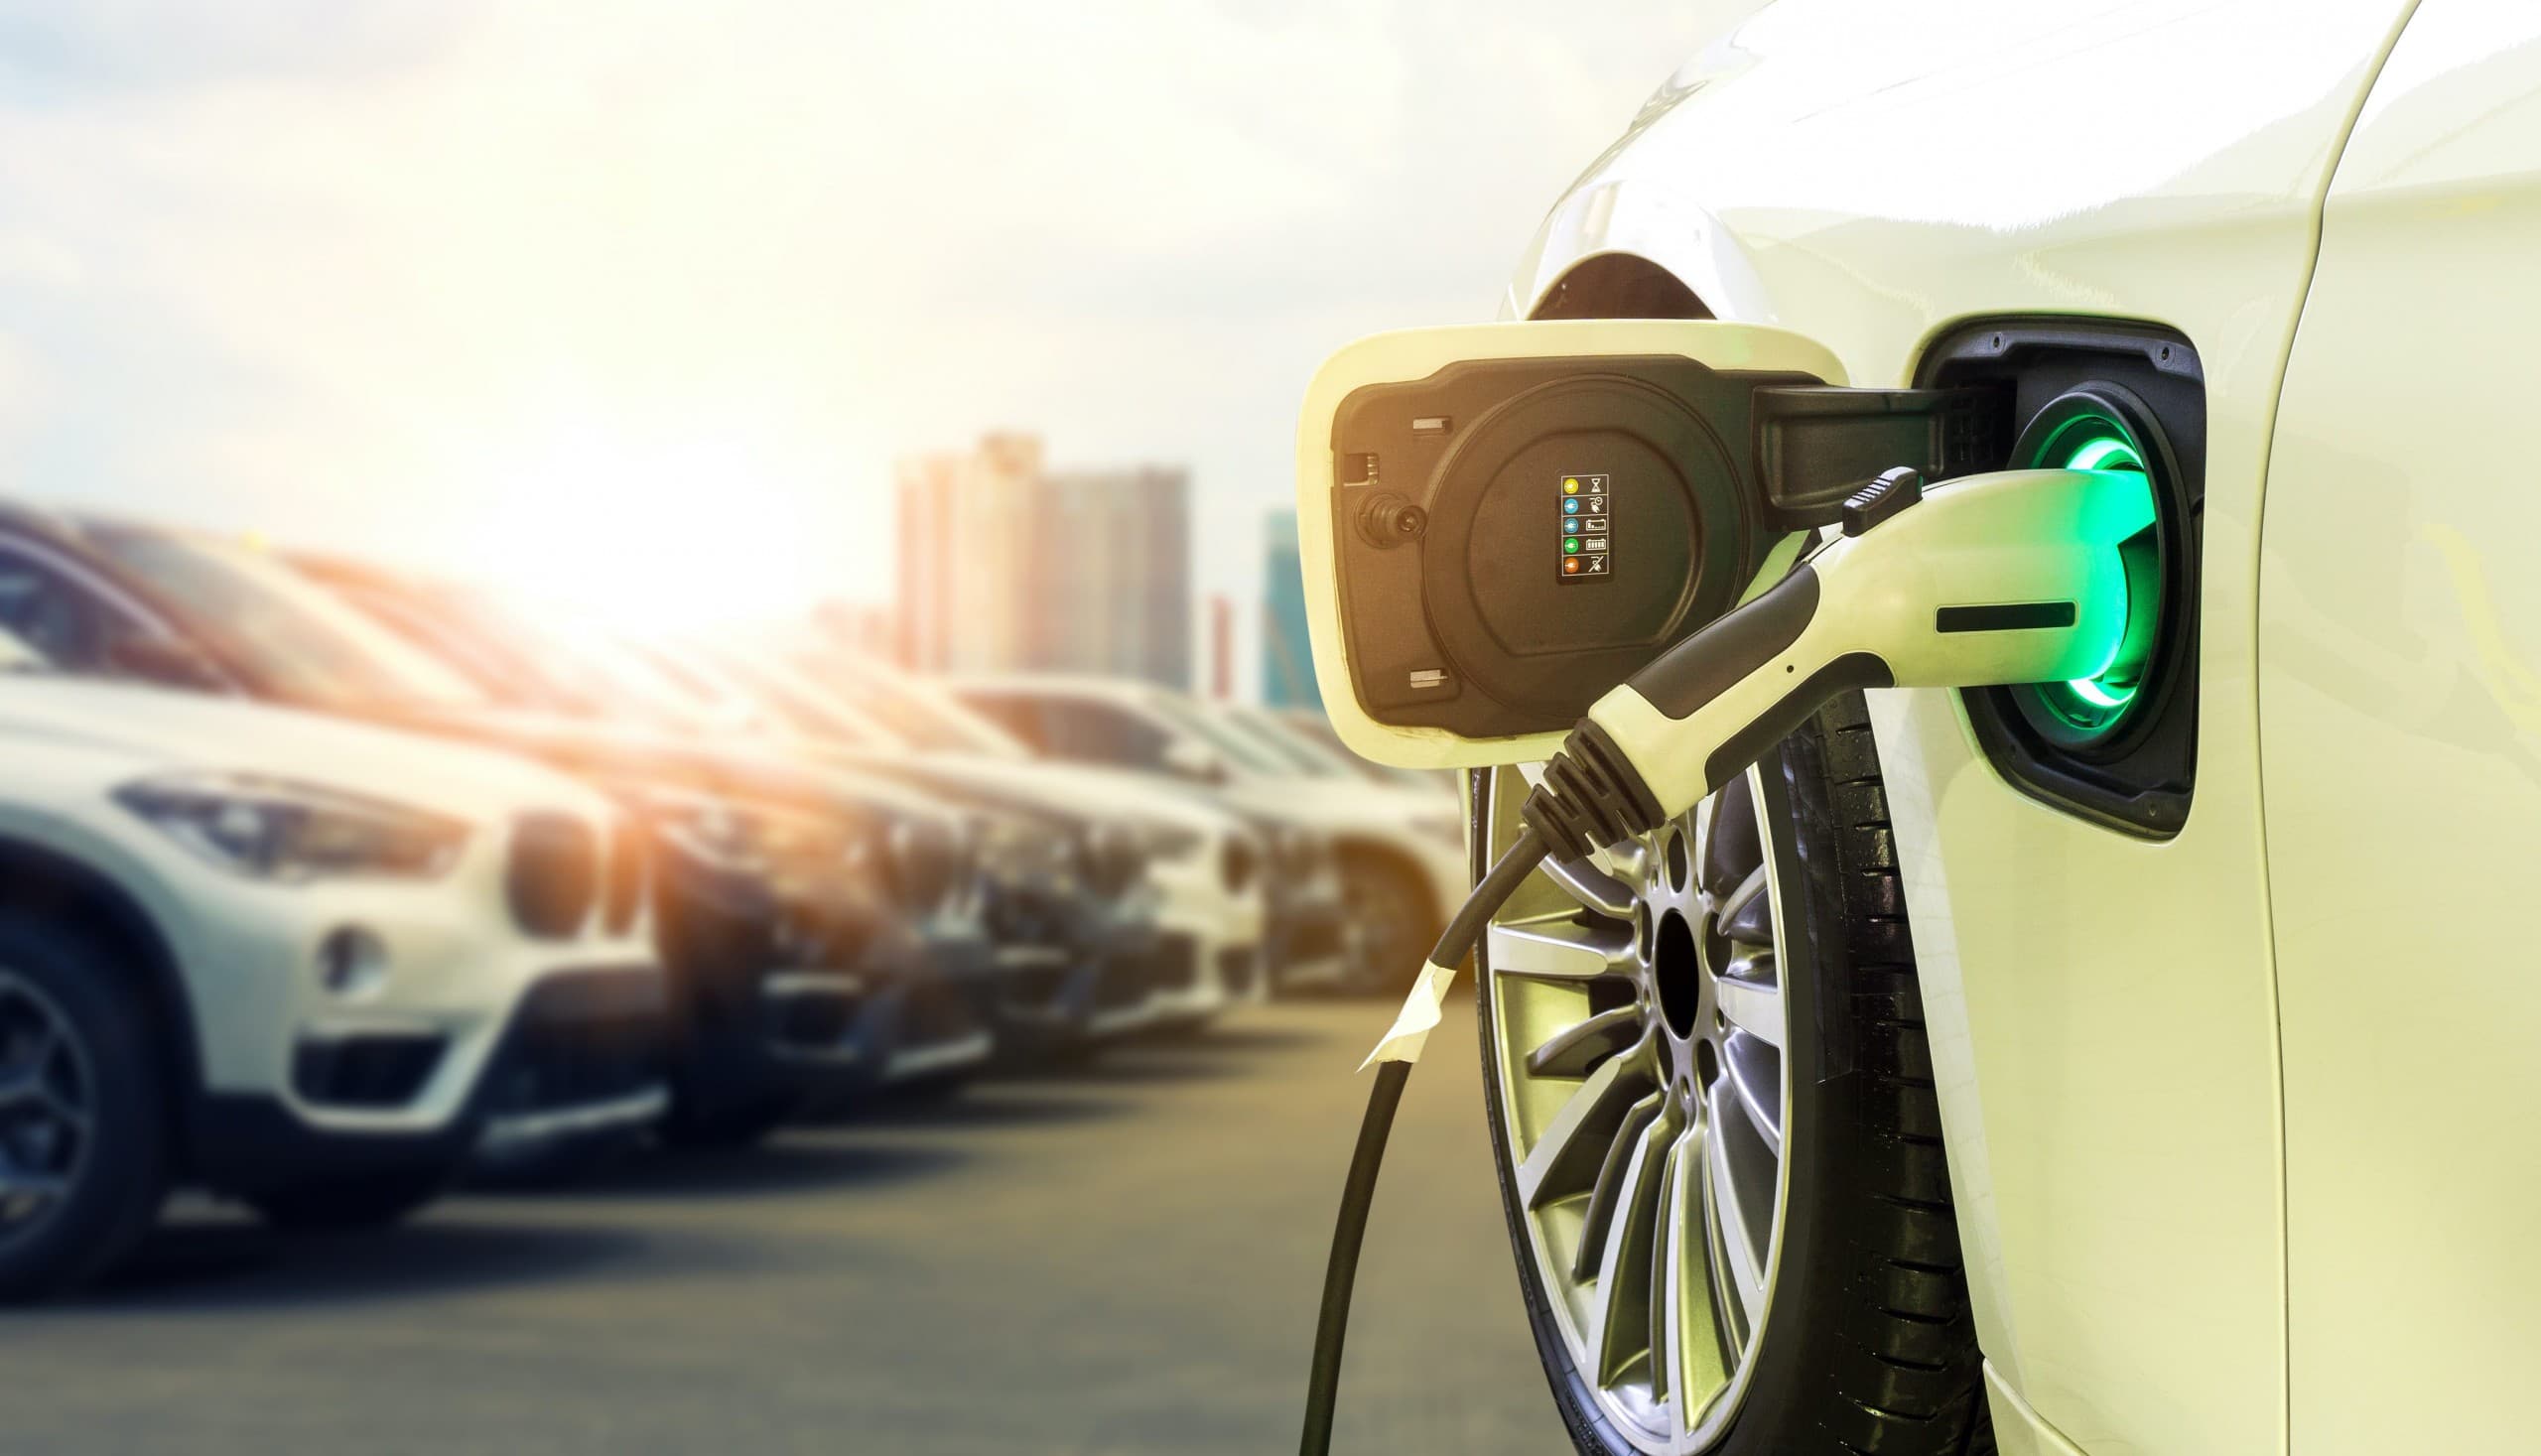 Read more about the article Electrical automobile gross sales proceed to surge, regardless of U.S. report gross sales are lagging